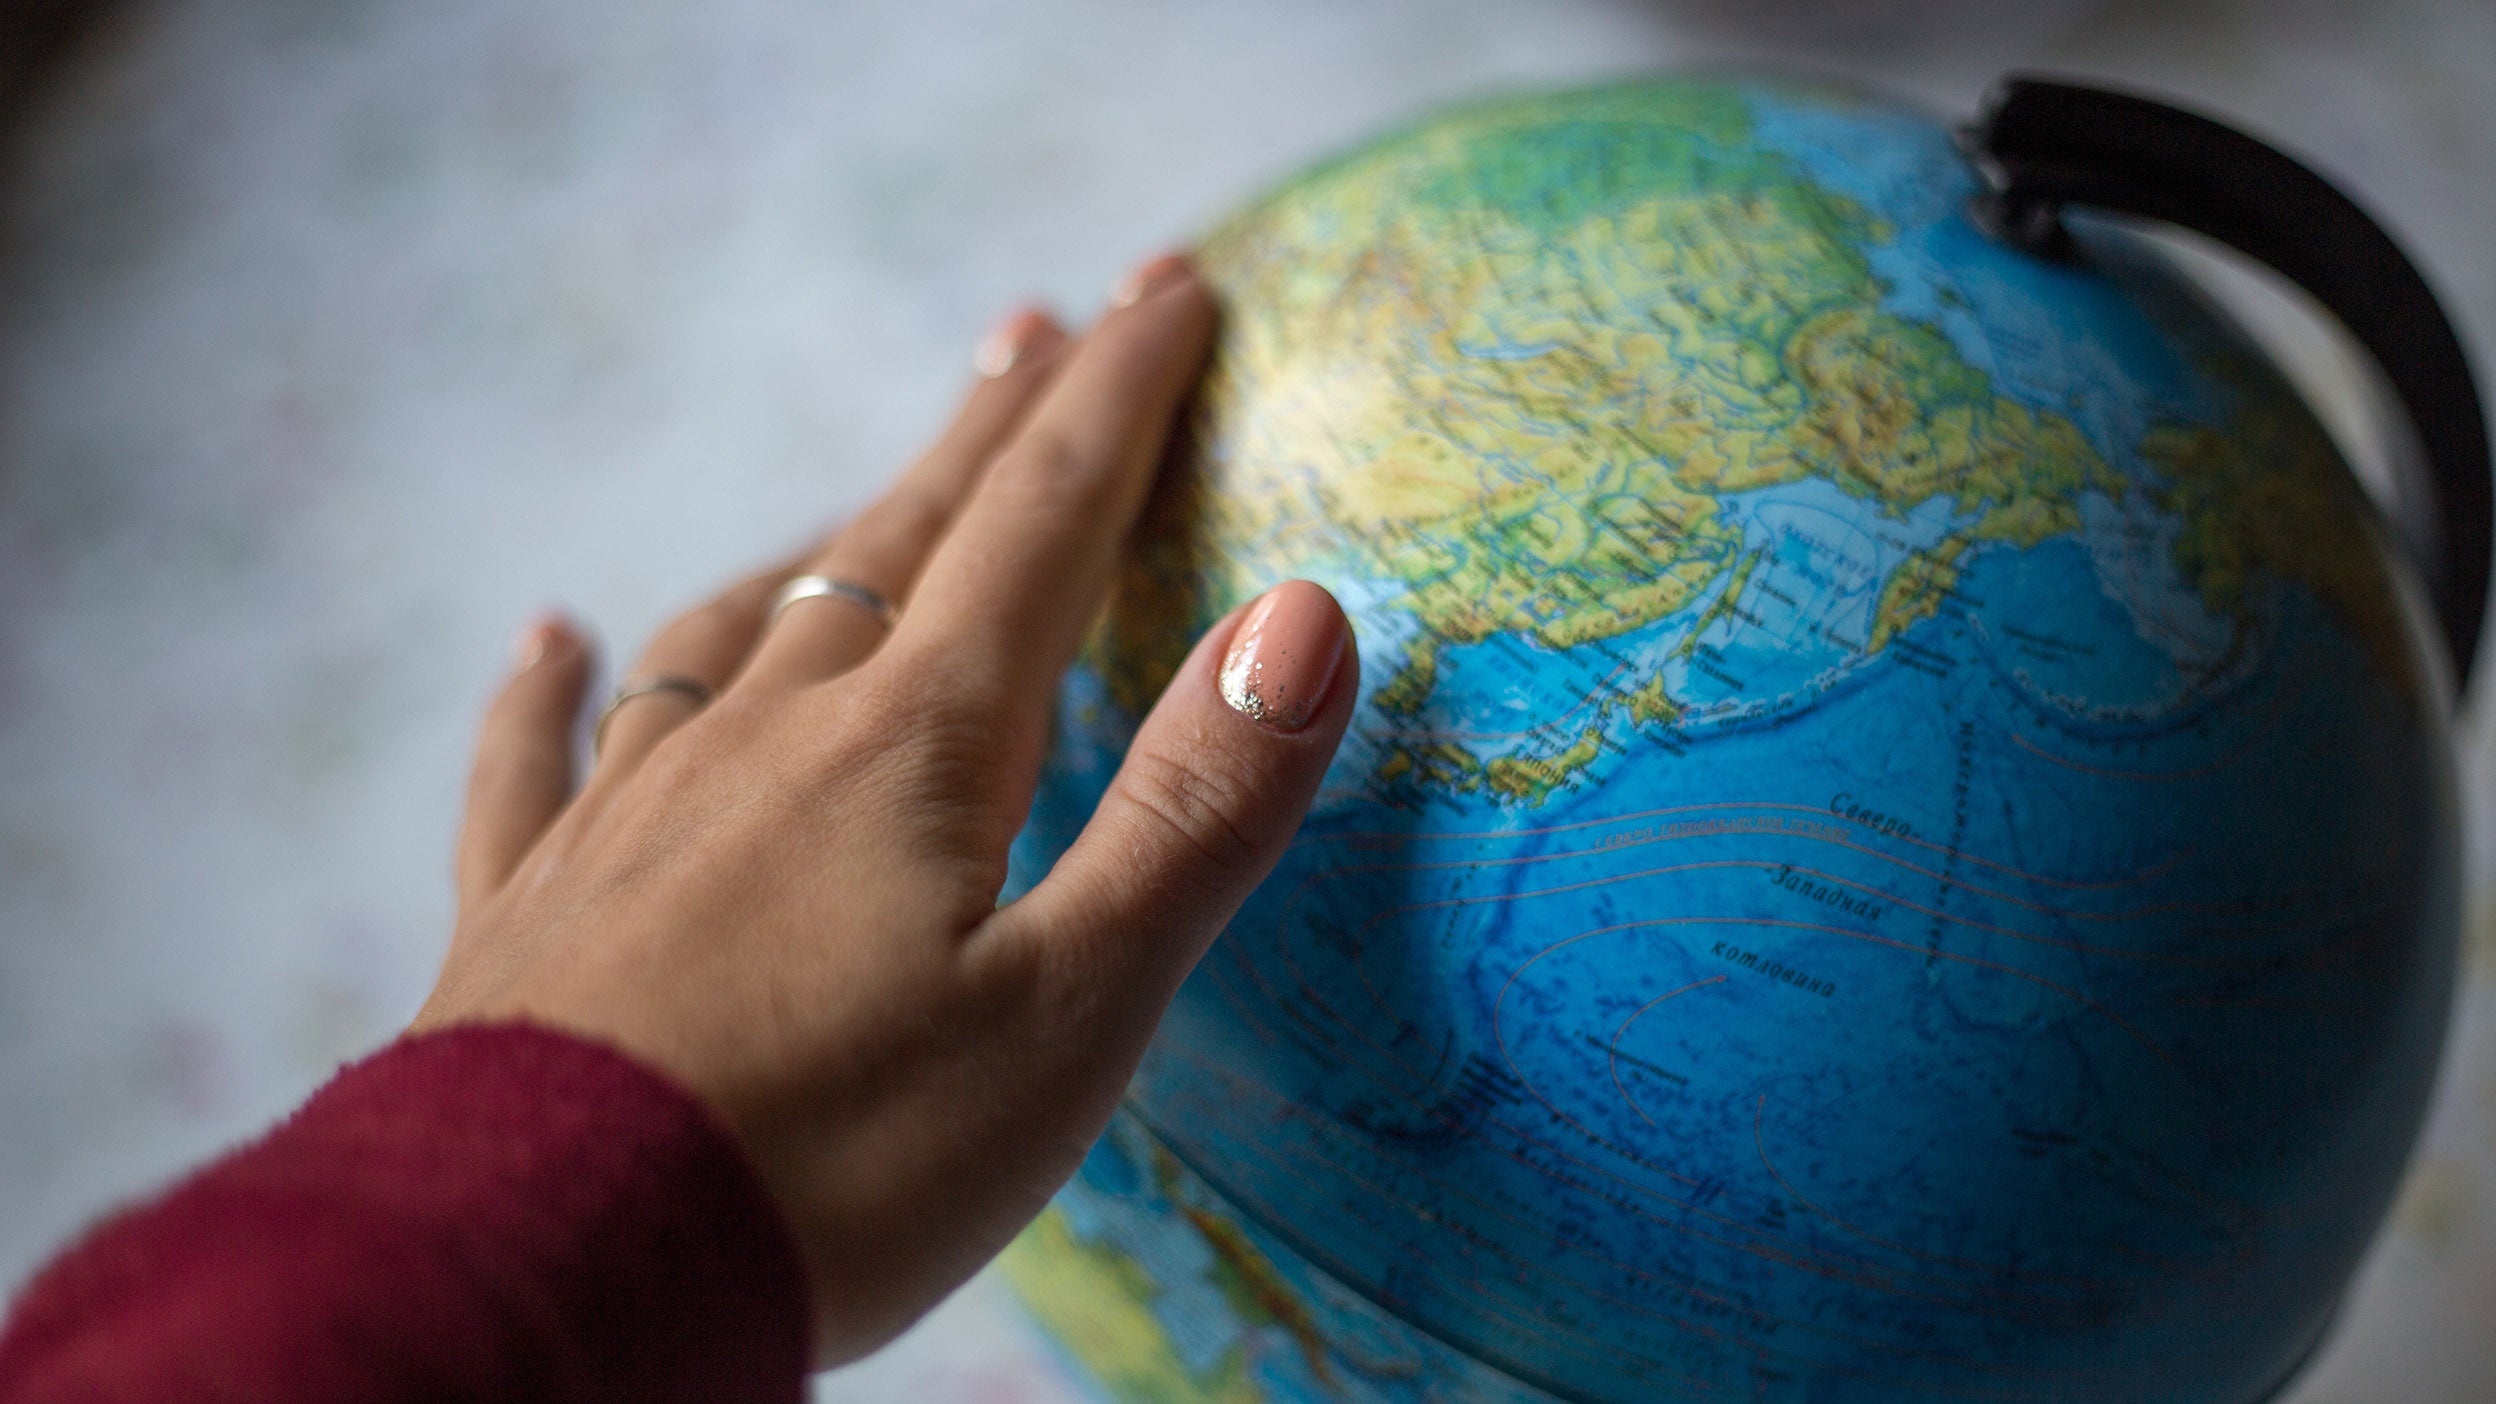 A person’s hand turns a globe.